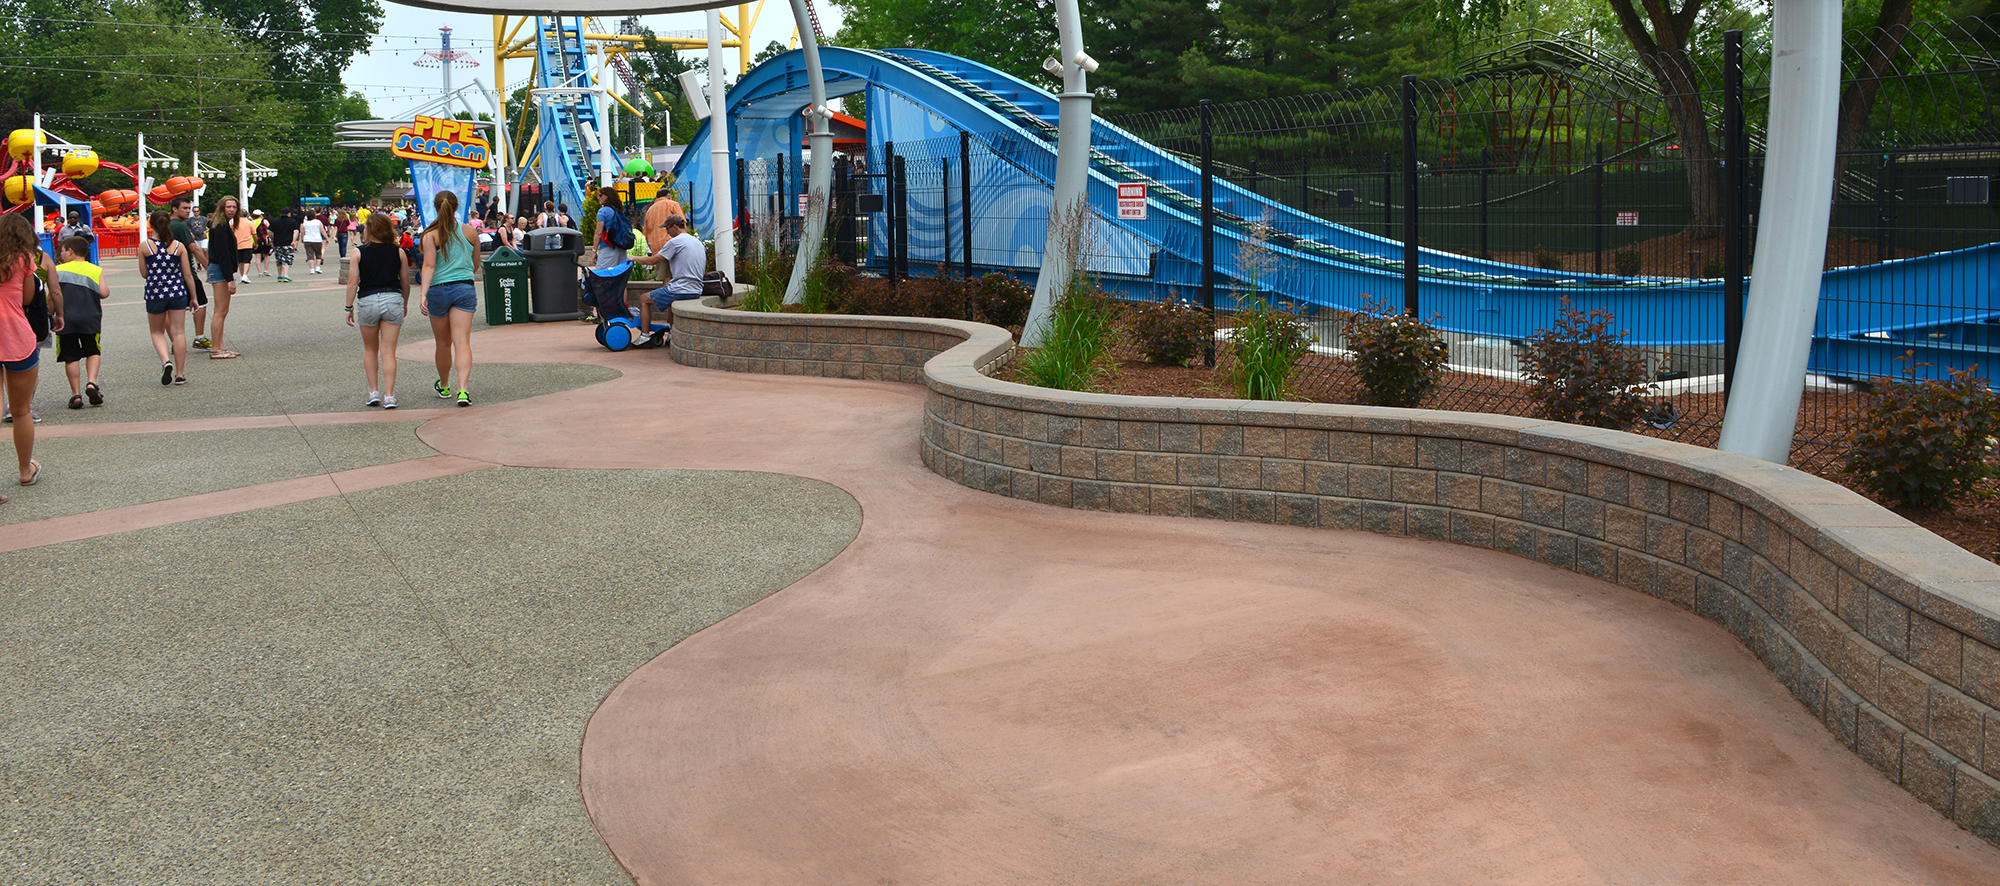 A retaining wall mimics the freeflowing curves of the rollercoaster behind the fence, while providing additional seating for visitors.